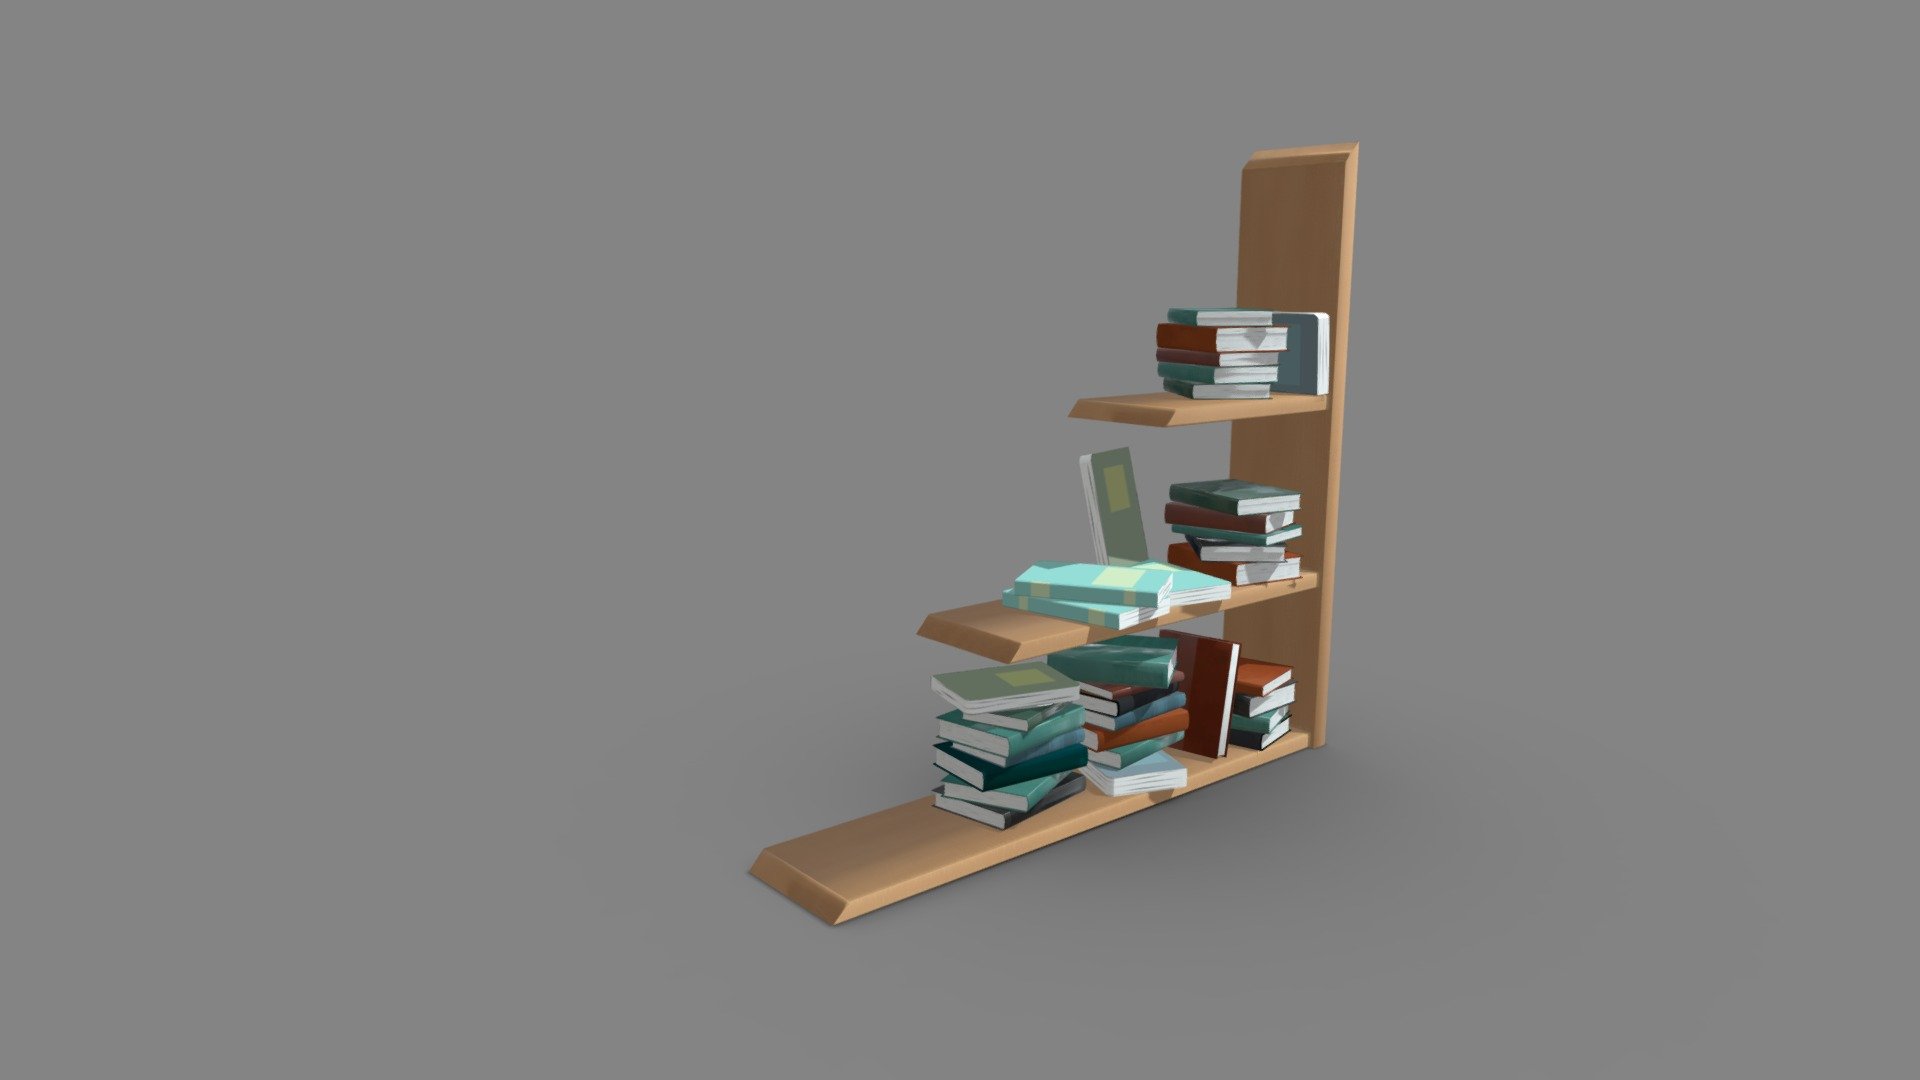 Cartoon wooden desk

Files :




3DS Max 2018 Vray 3.6

Blender 3.3 (Render with volumetrics)

Fbx

Obj

Gltf

Usdz

2 PRB_Materials

7 Textures _ 4k .png (Color, Specular, Roughness, Normals,)

Unit system is set to metric(m). The dimensions are real


Any questions or comments about the model, you can write to me. I will be happy to assist you :)




Poly : 3438



Verts : 3868

VIDEO : https://youtu.be/KnxN3lzcj6c - Cartoon Wall shelf with books - Buy Royalty Free 3D model by 3D Figures (@3DFigures) 3d model